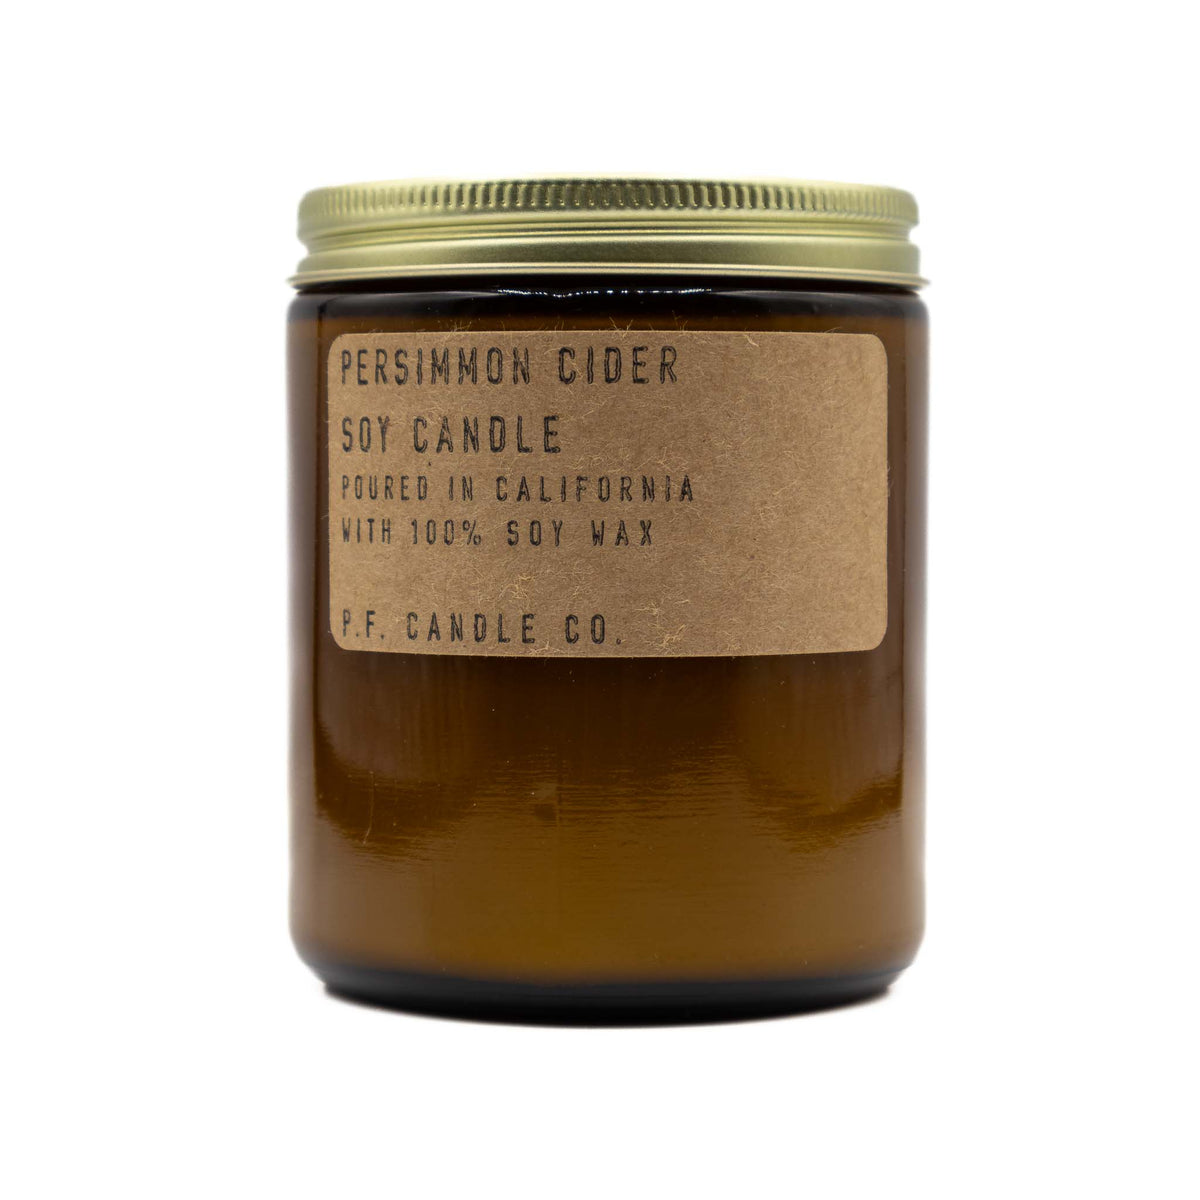 PF Candle Co Persimmon Cider